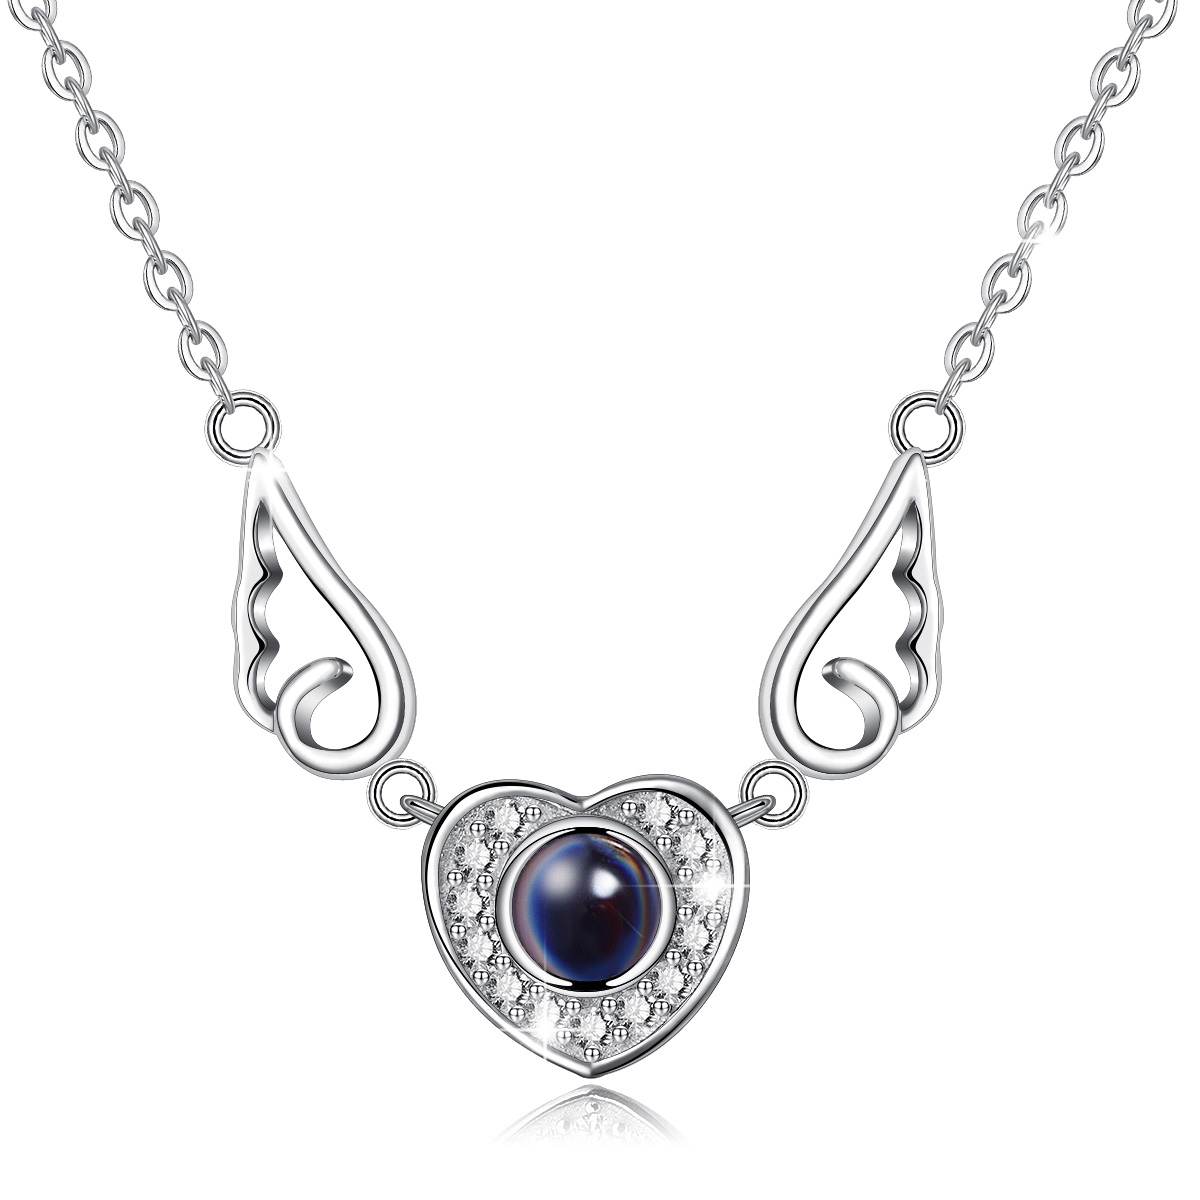 S925 Sterling Silver Hollow Heart Shape 100 Languages I Love You Projection Pendant Necklaces With Angel Wings